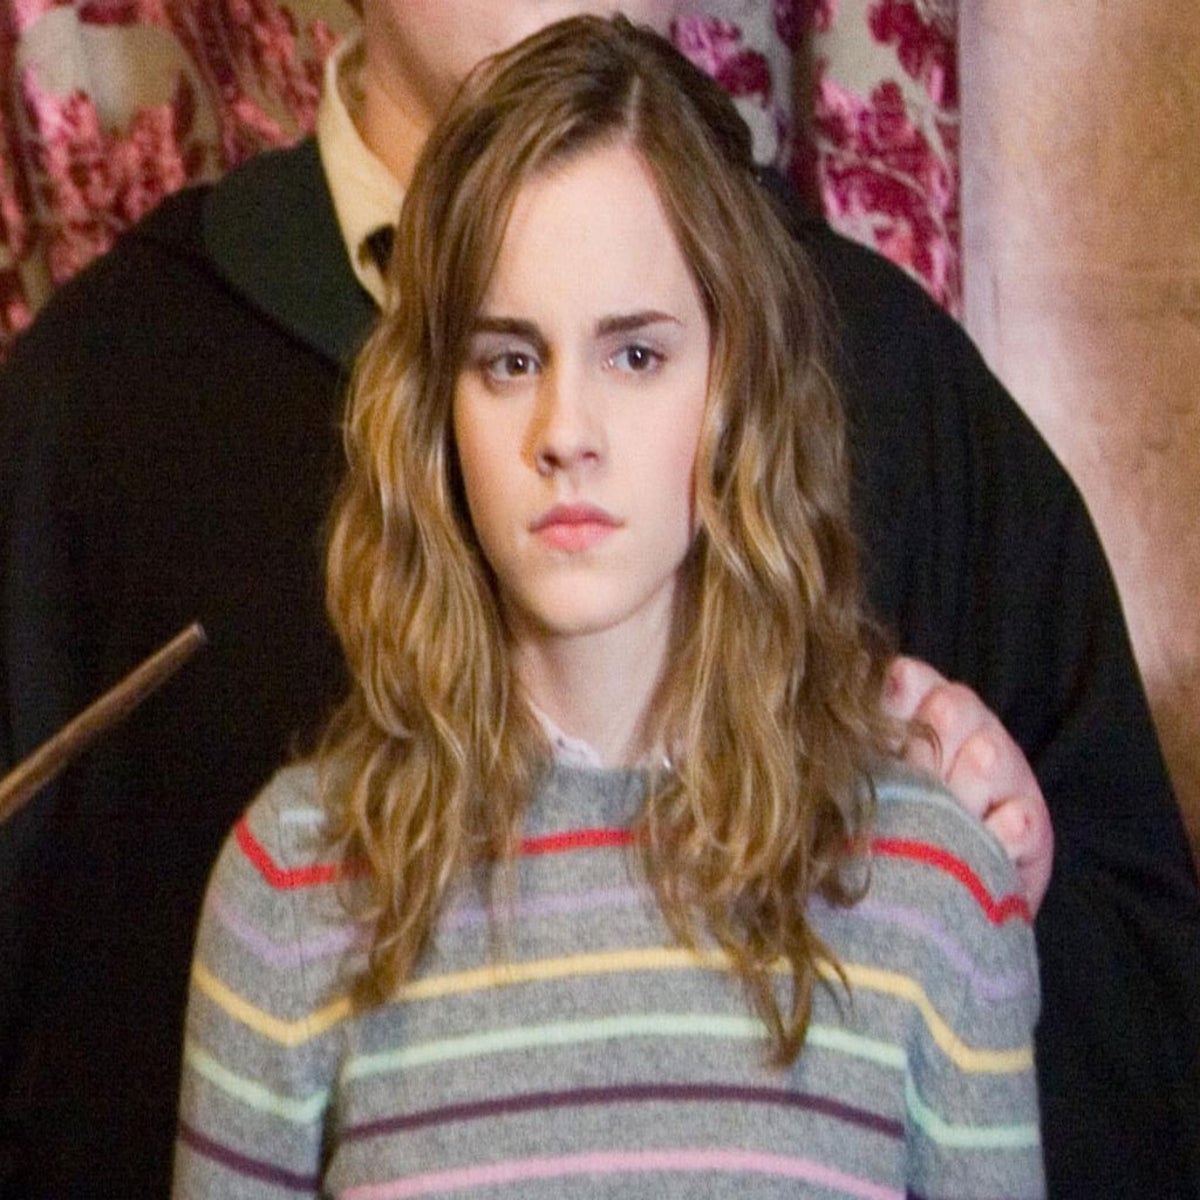 The Hermione Granger effect: why teenagers are finally starting to